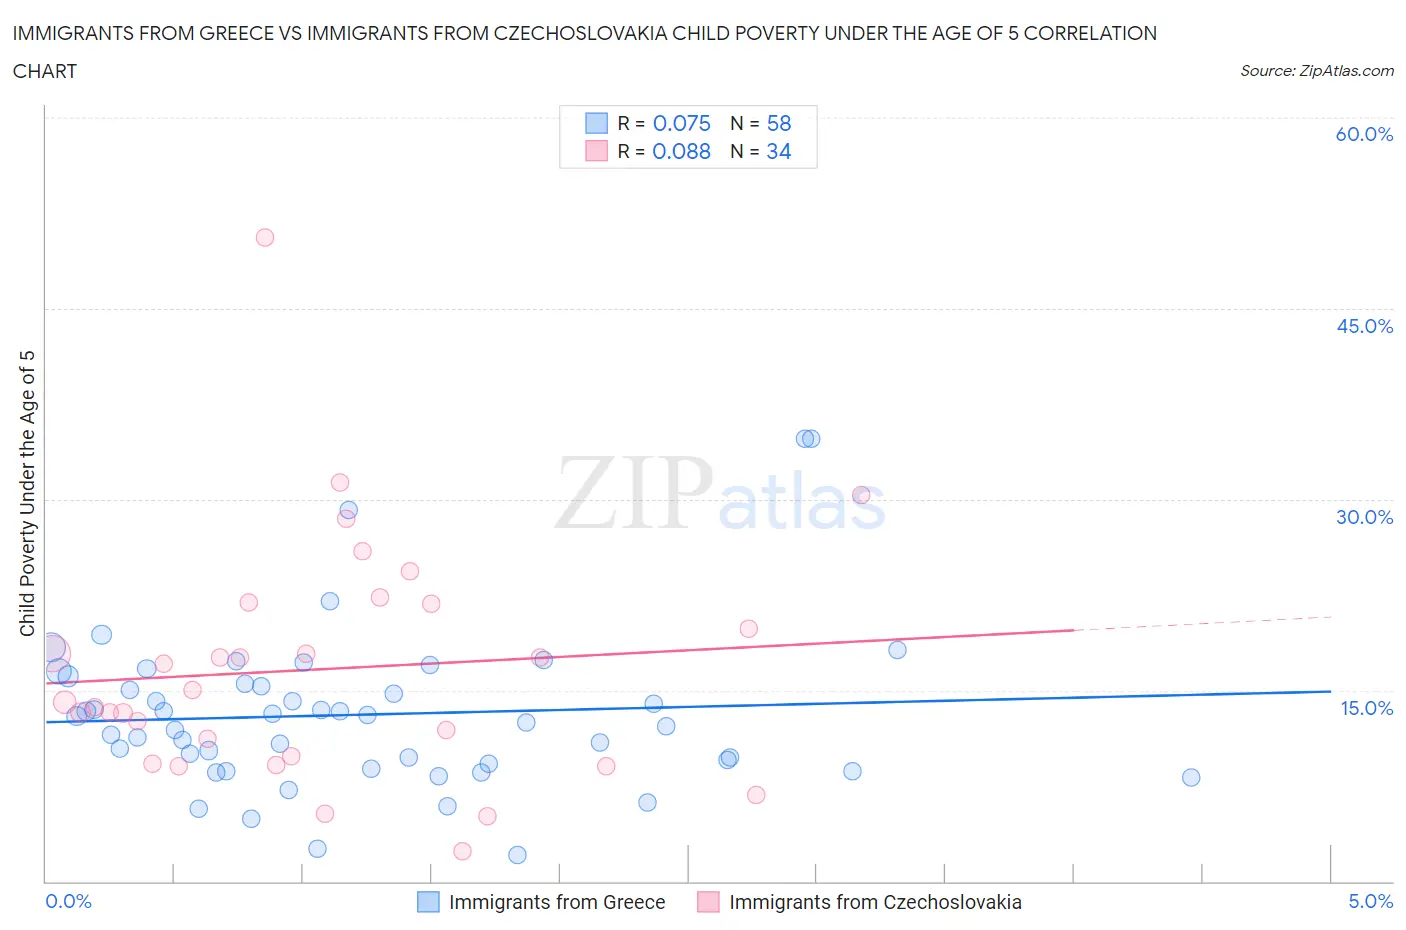 Immigrants from Greece vs Immigrants from Czechoslovakia Child Poverty Under the Age of 5